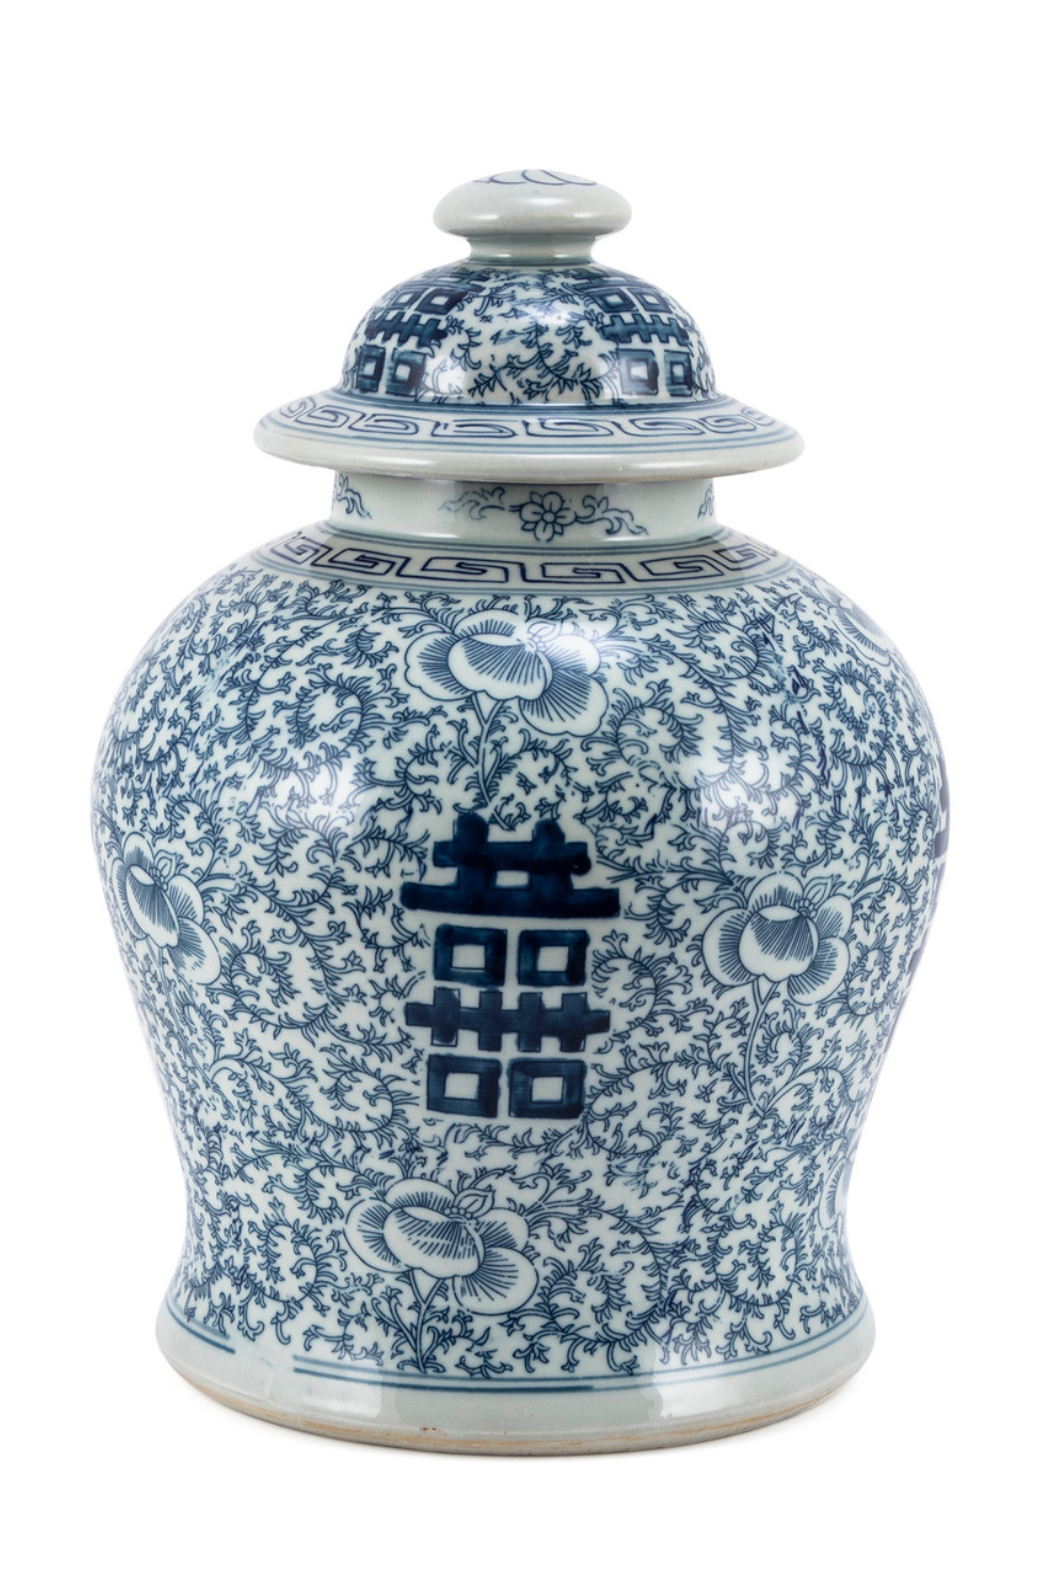 Blue & White Double Happiness Floral Temple Jar